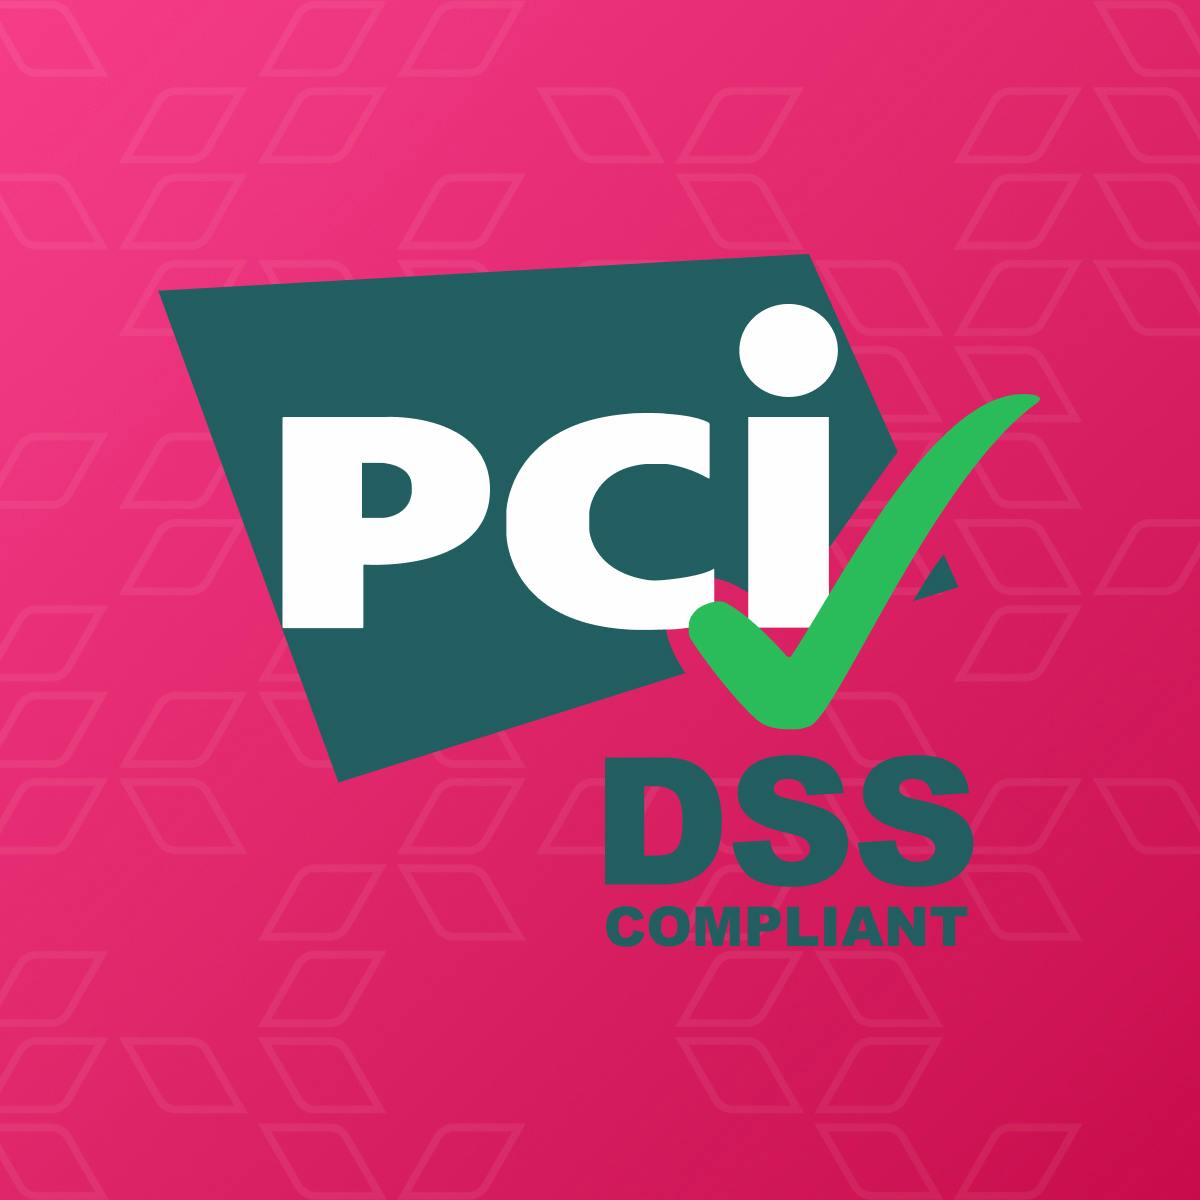 PCI and DSS compliant logo, indicating Daxko's nonprofit accounting software is compliant for safe payments.